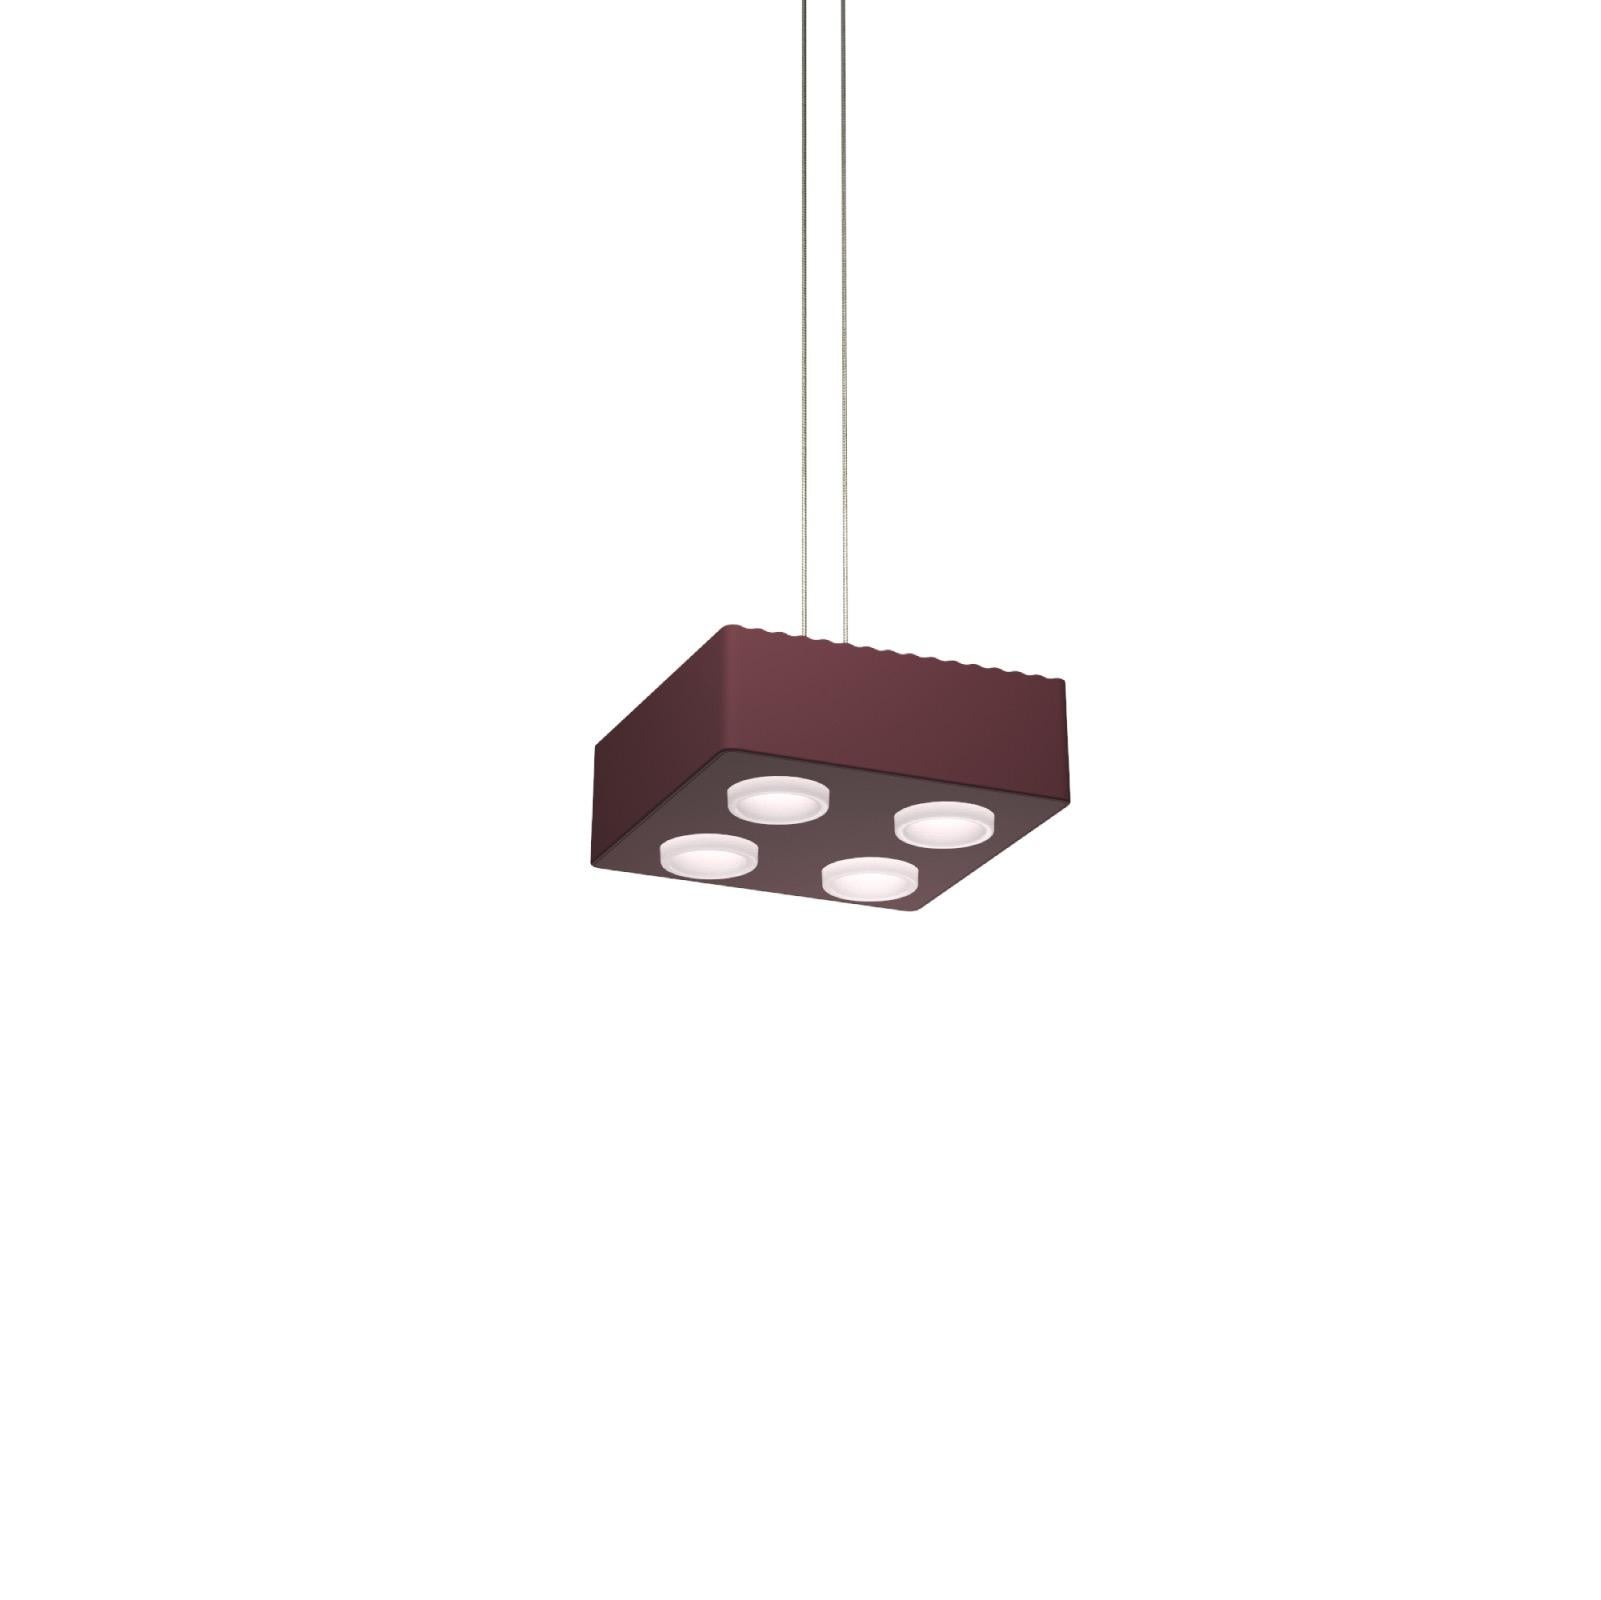 Domino Pendant lamp by Sylvain Willenz x AGO Lighting
Burgundy - Single Pendant Lamp

Materials: Aluminum 
Light Source: Integrated LED (COB), DC
Watt. 15 W
Color temp. 2700 / 3000K
Cable Length: 3m 

Available colors:
Charcoal, burgundy,